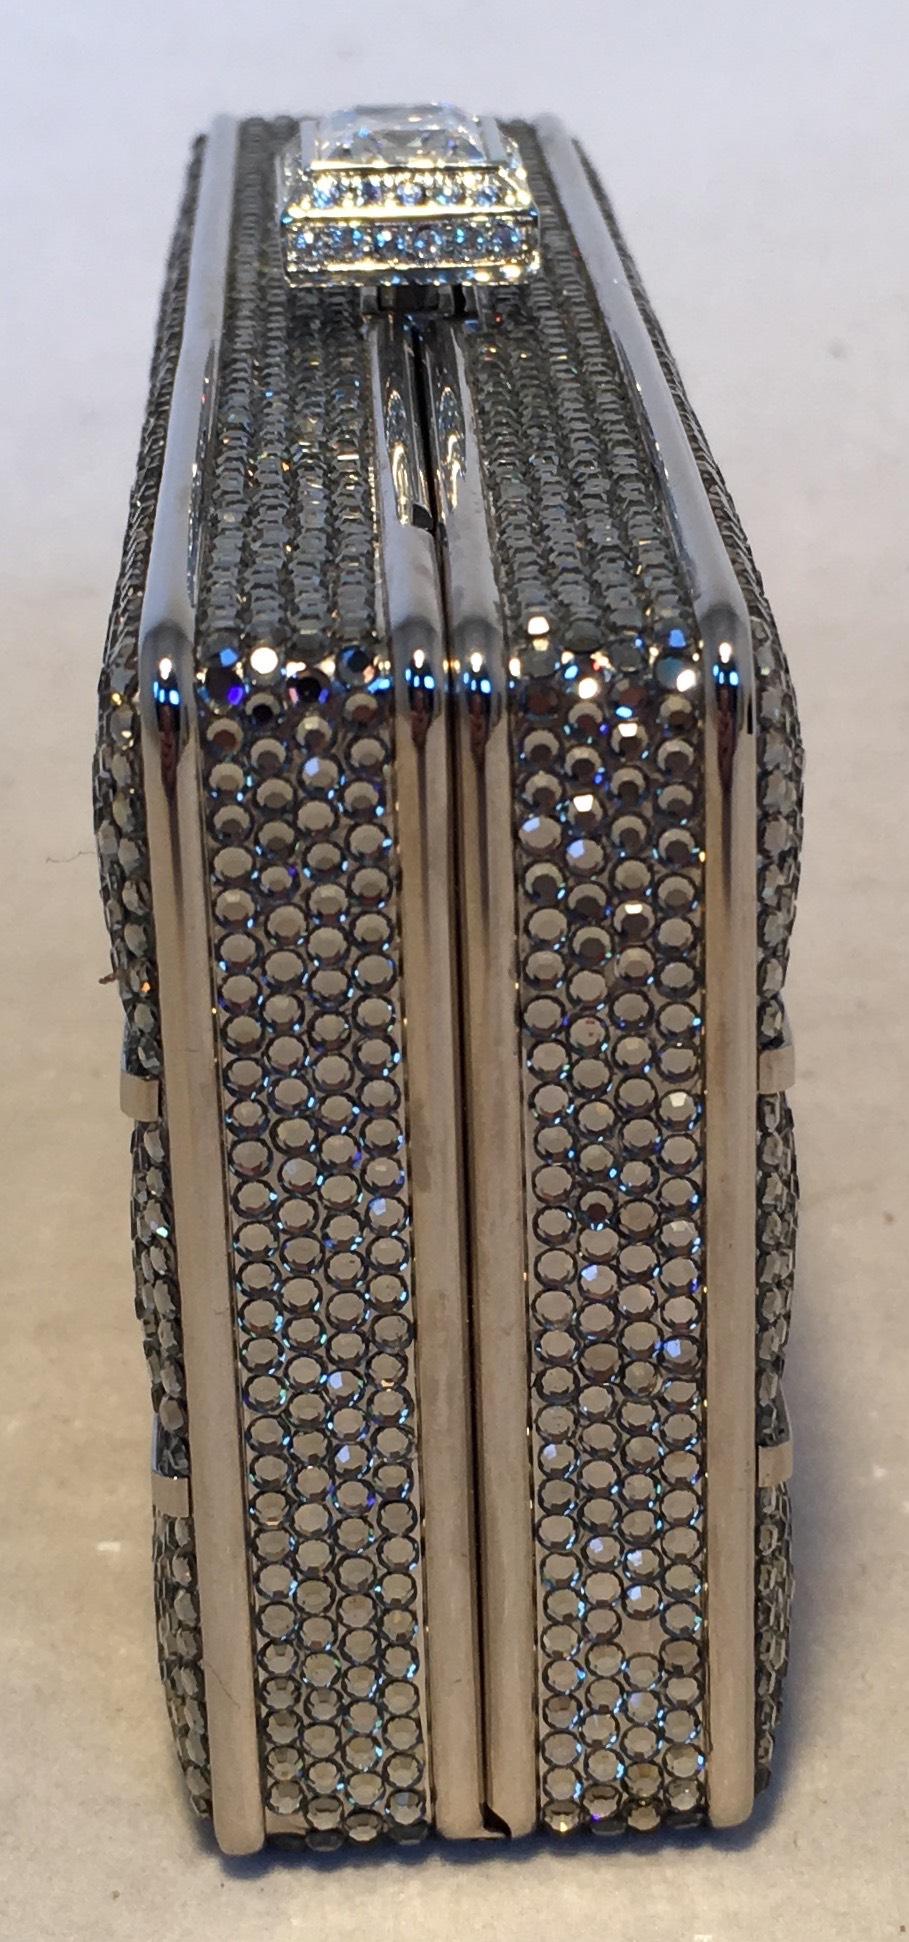 Beautiful Judith Leiber Silver Swarovski Crystal Stripe Minaudiere Evening Bag Clutch in excellent condition. Silver Swarovski Crystal exterior with silver body in a unique triple stripe rectangle shape and pattern. Top Crystal button closure opens